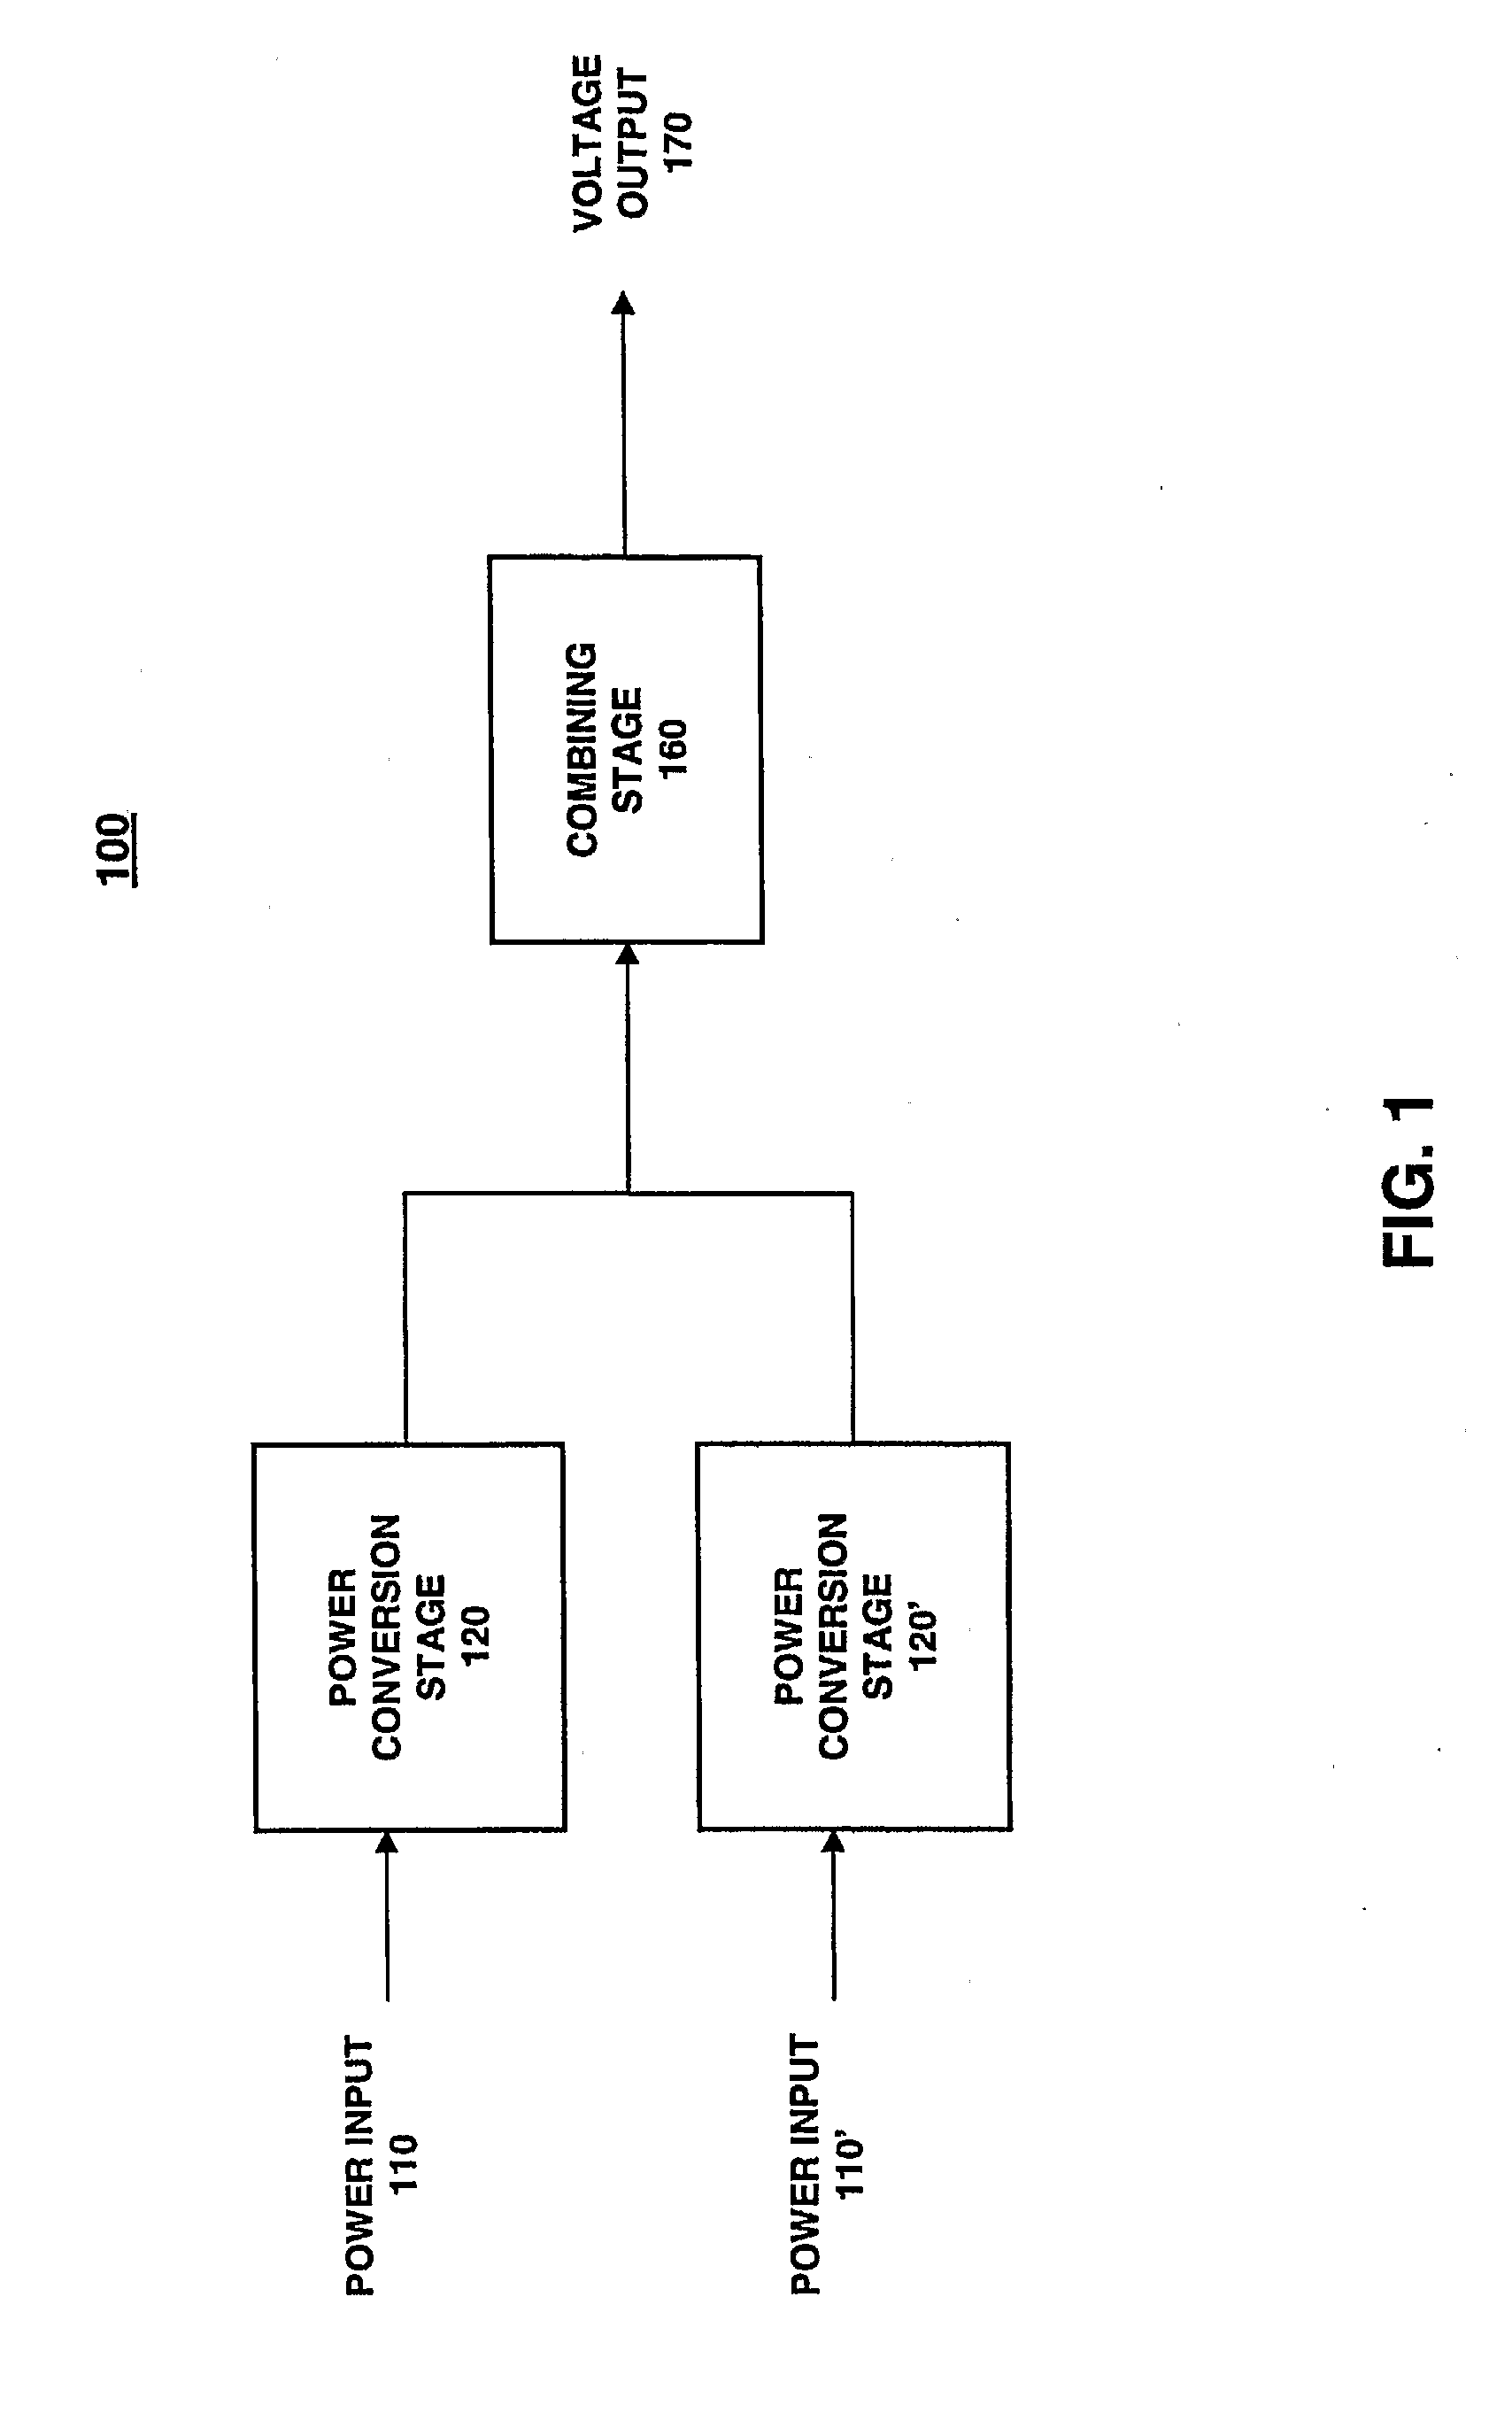 System and Method for Electrical Power Conversion